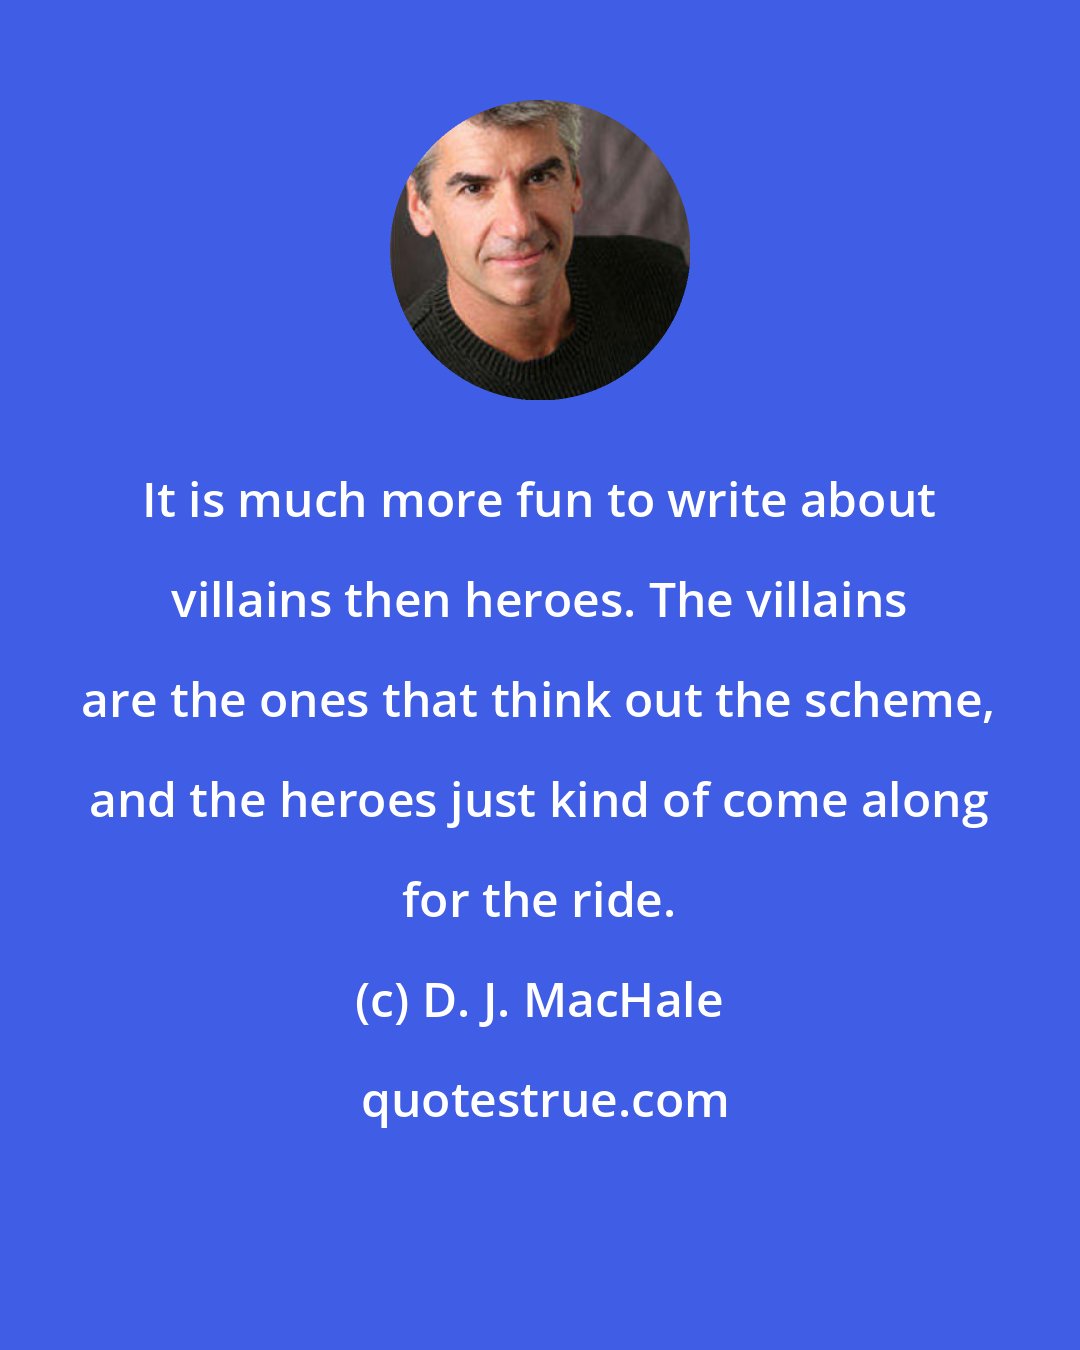 D. J. MacHale: It is much more fun to write about villains then heroes. The villains are the ones that think out the scheme, and the heroes just kind of come along for the ride.